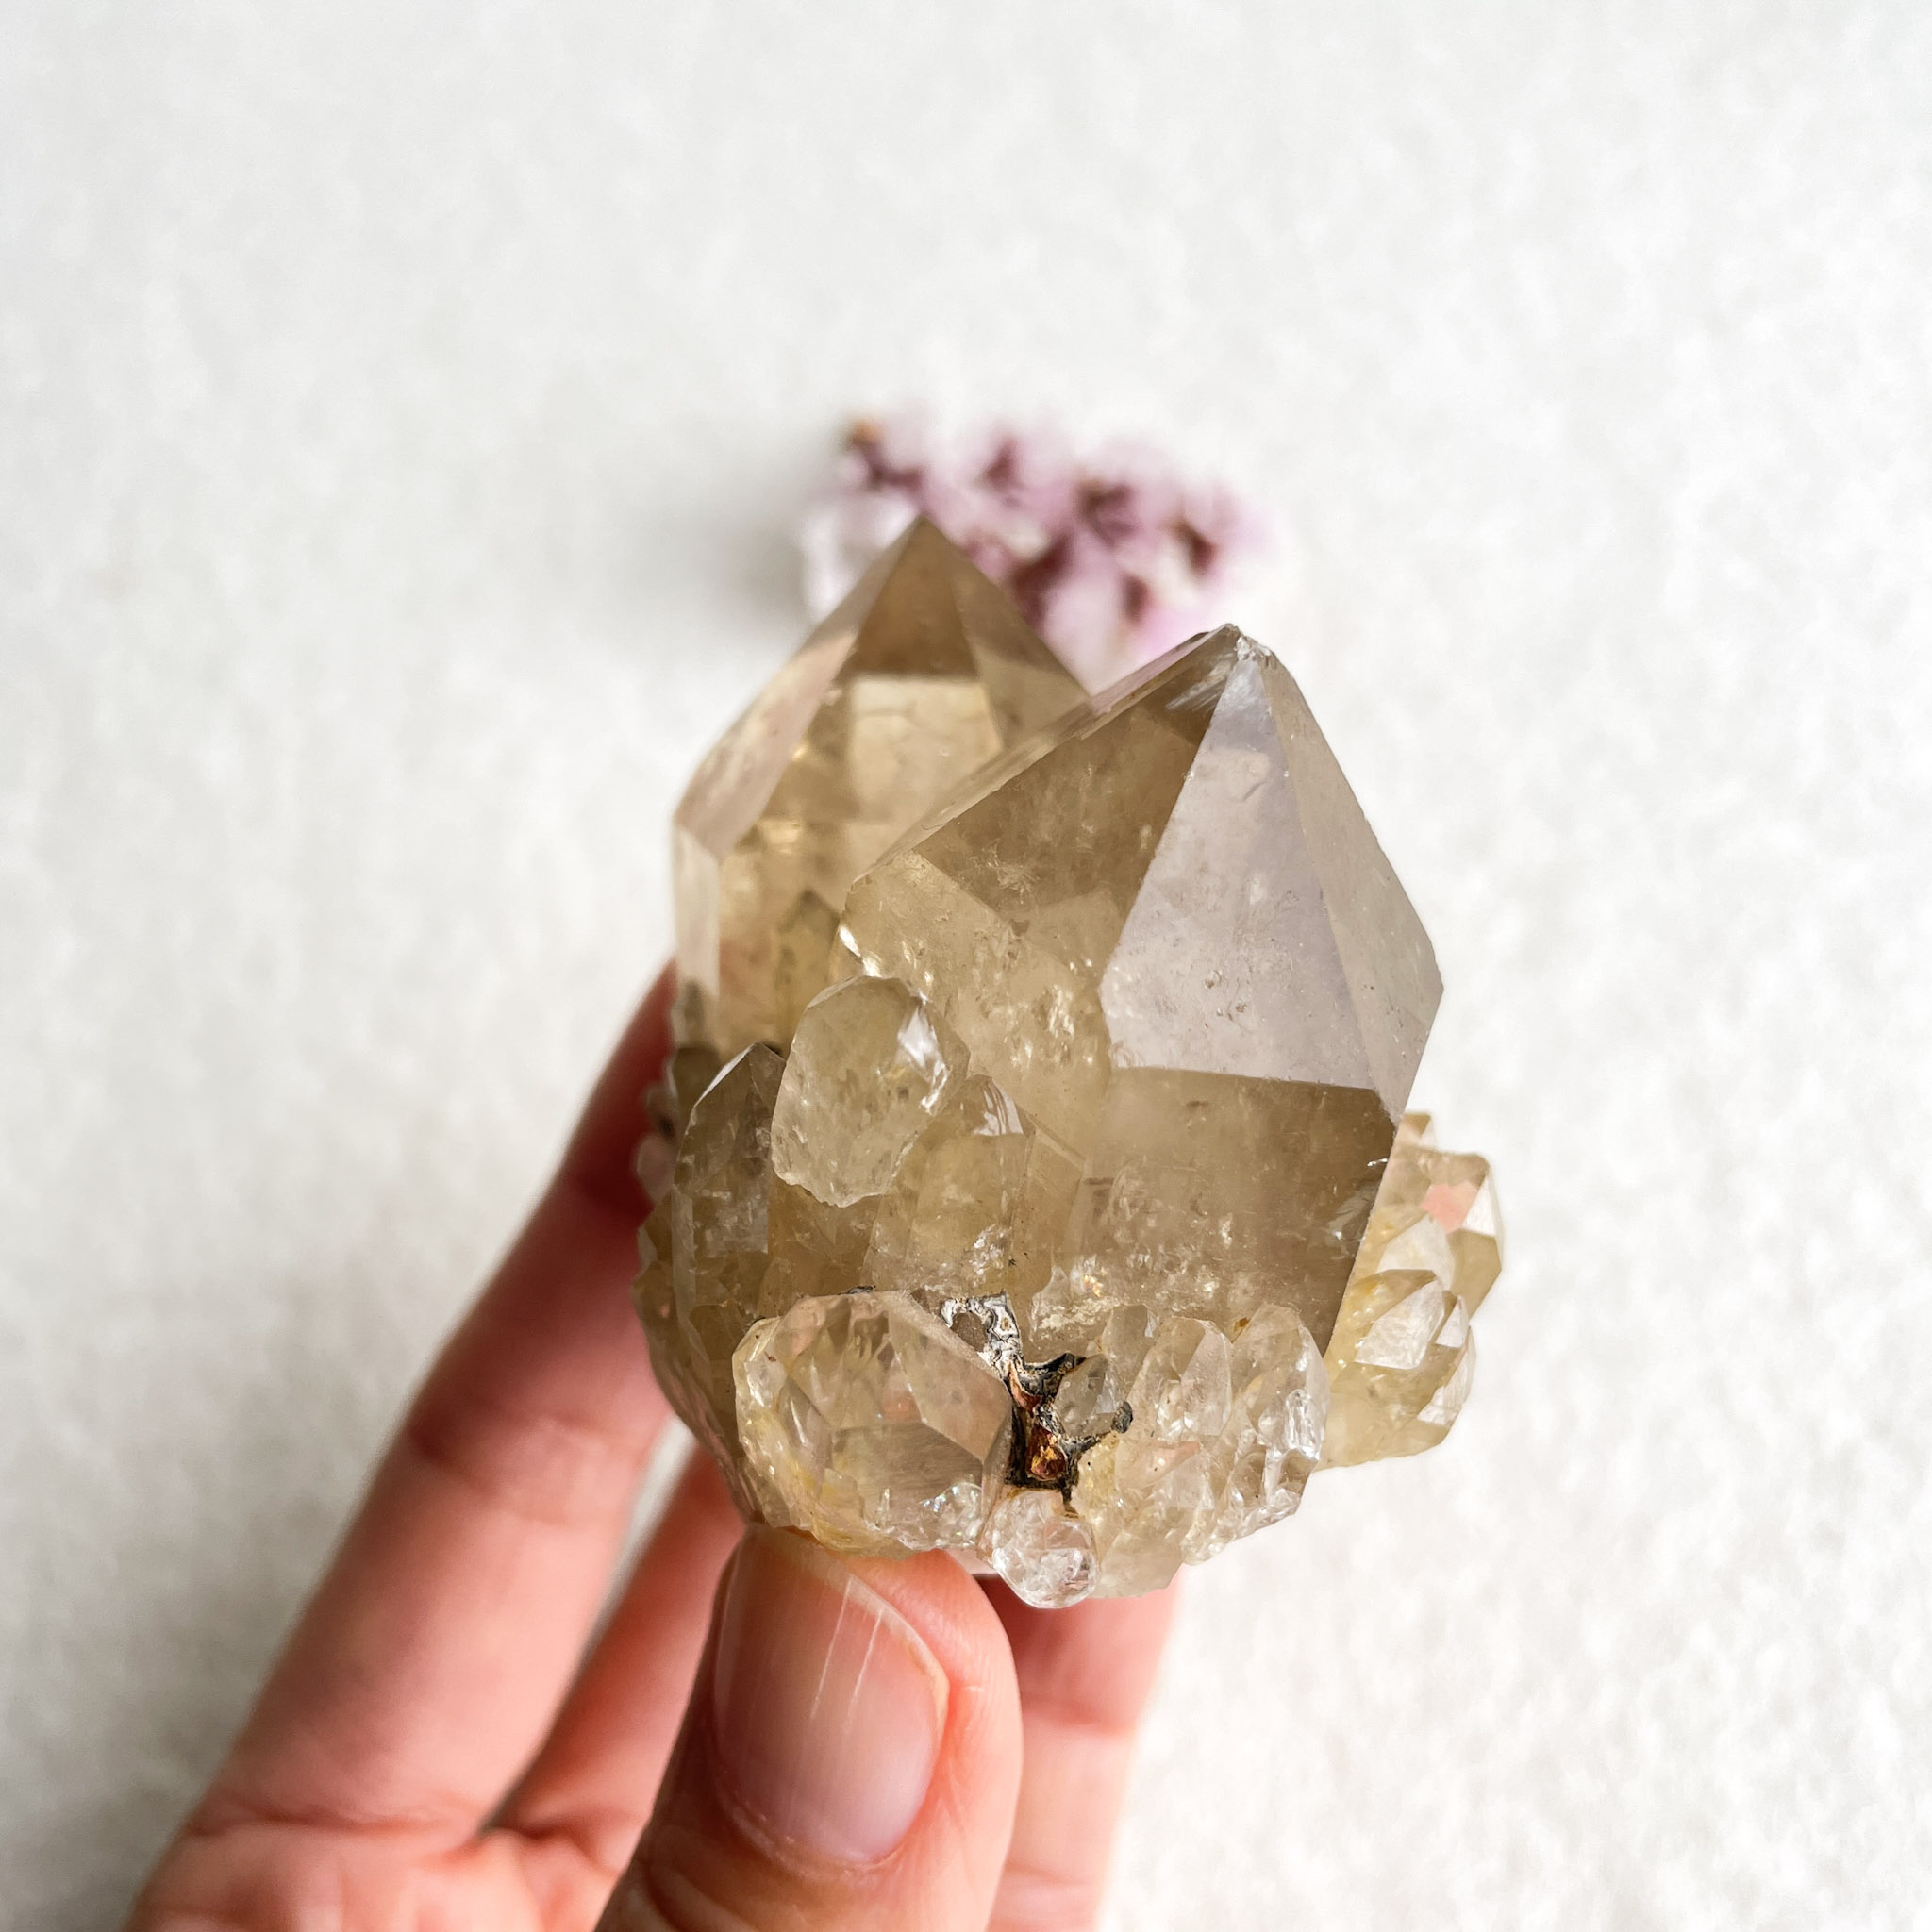 A close-up of a person's hand holding a cluster of large, translucent quartz crystals with a pale purple flower blurred in the background.